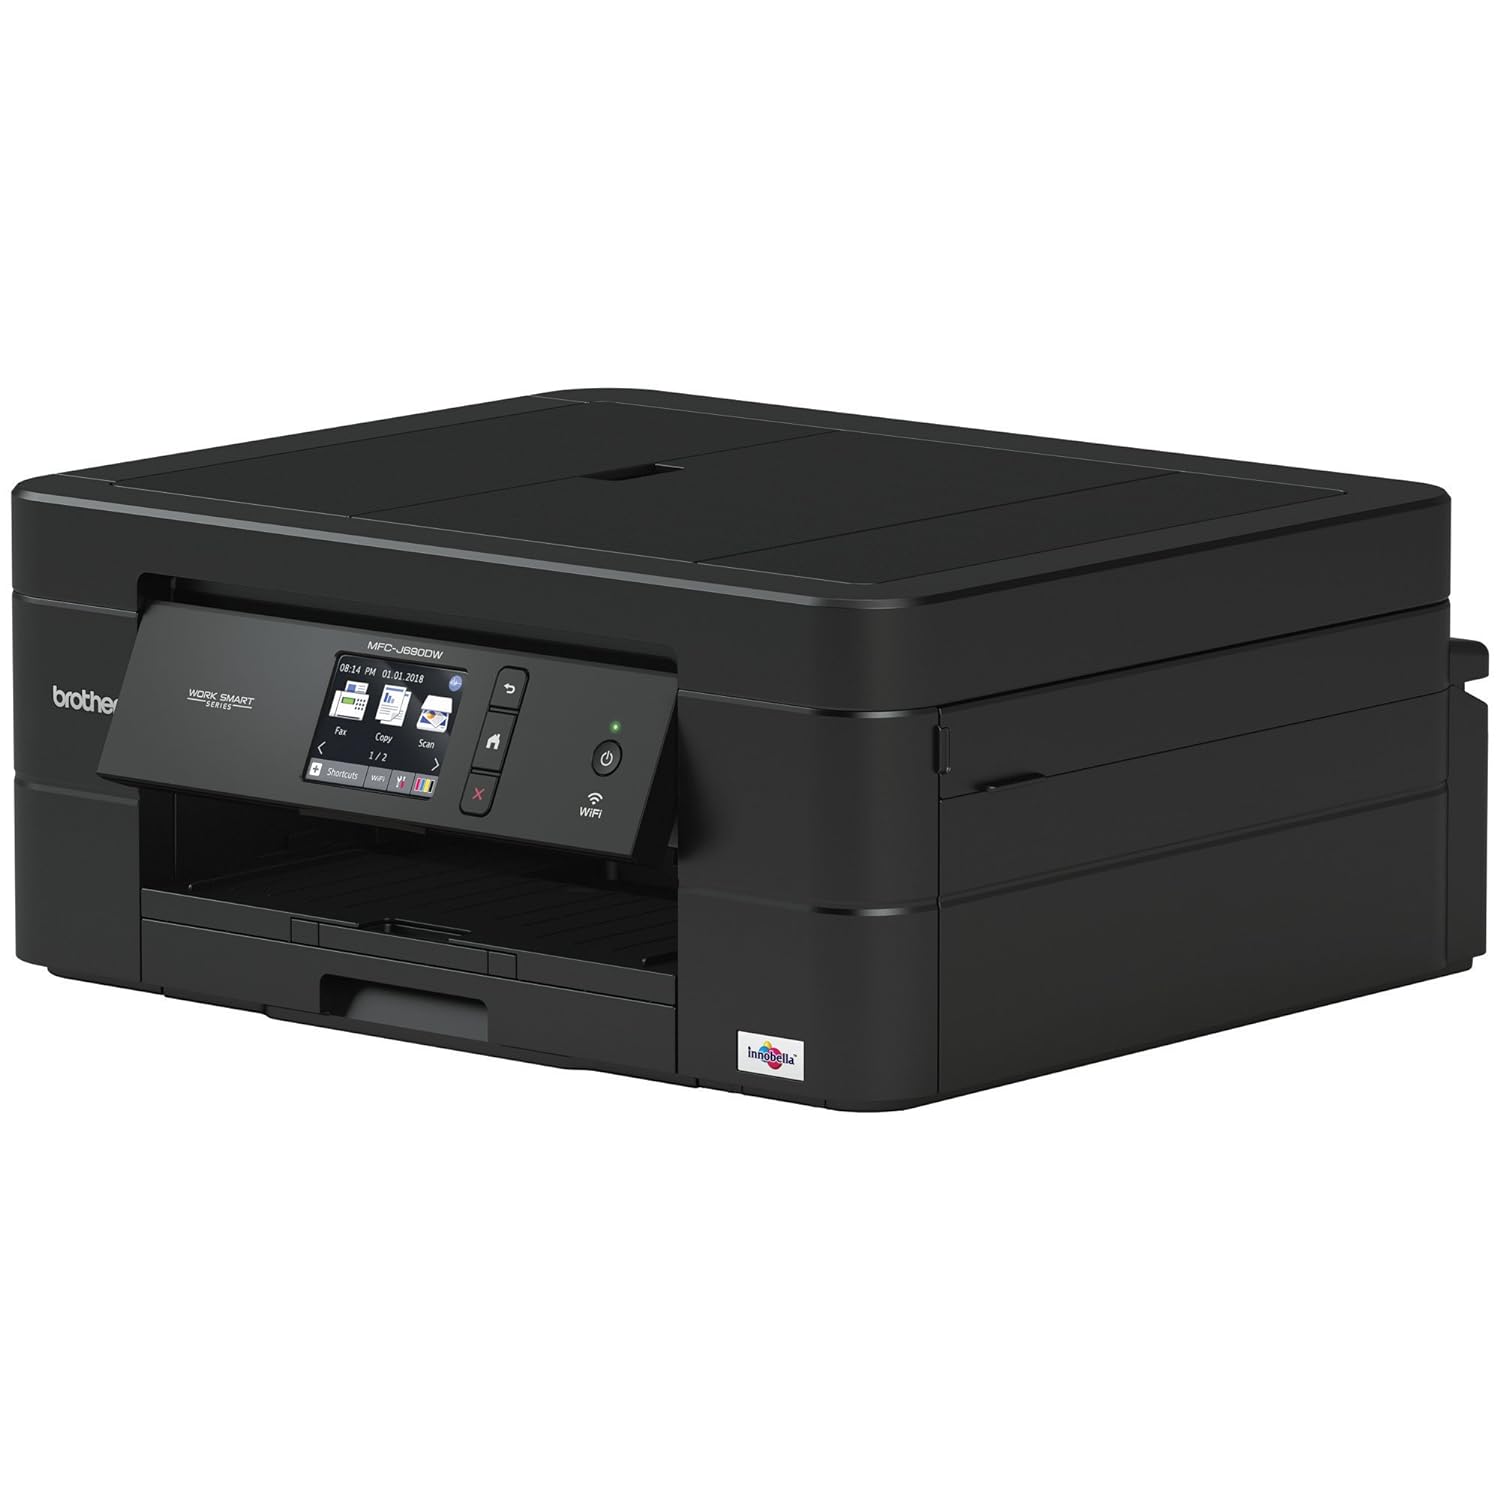 Brother Printer MFCJ690DW Wireless Color Printer with Scanner, Copier and Fax